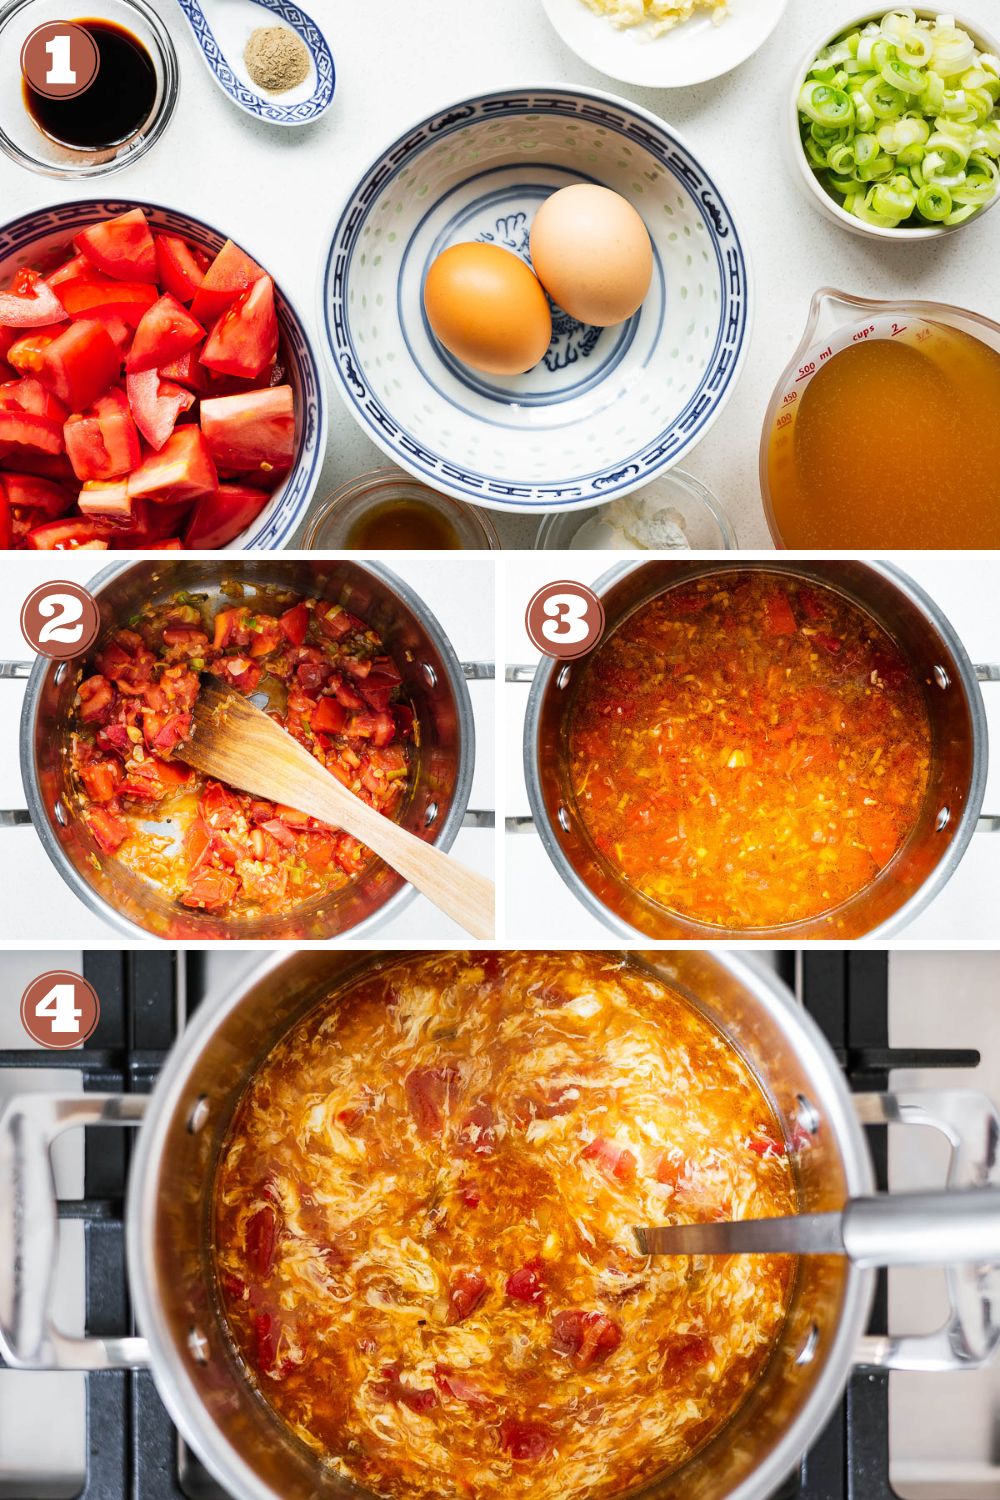 The four steps to make tomato egg drop soup: Prepare ingredients, stir-fry tomatoes, balance the broth, and create the egg ribbons.